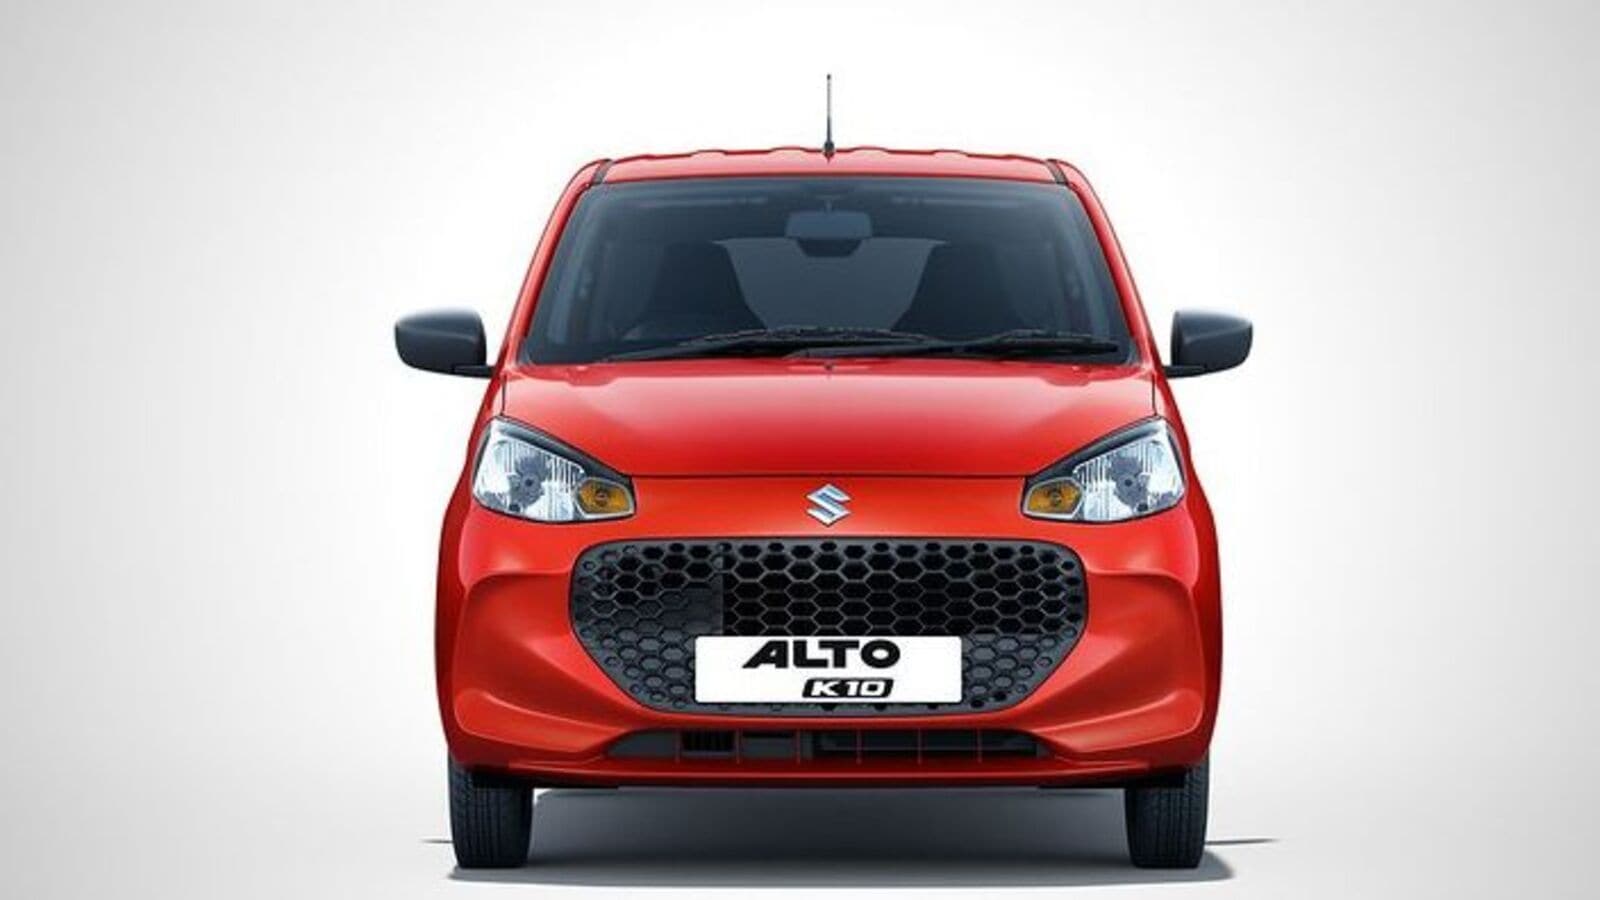 2022 Maruti Suzuki Alto K10 launched in India: Price and other details